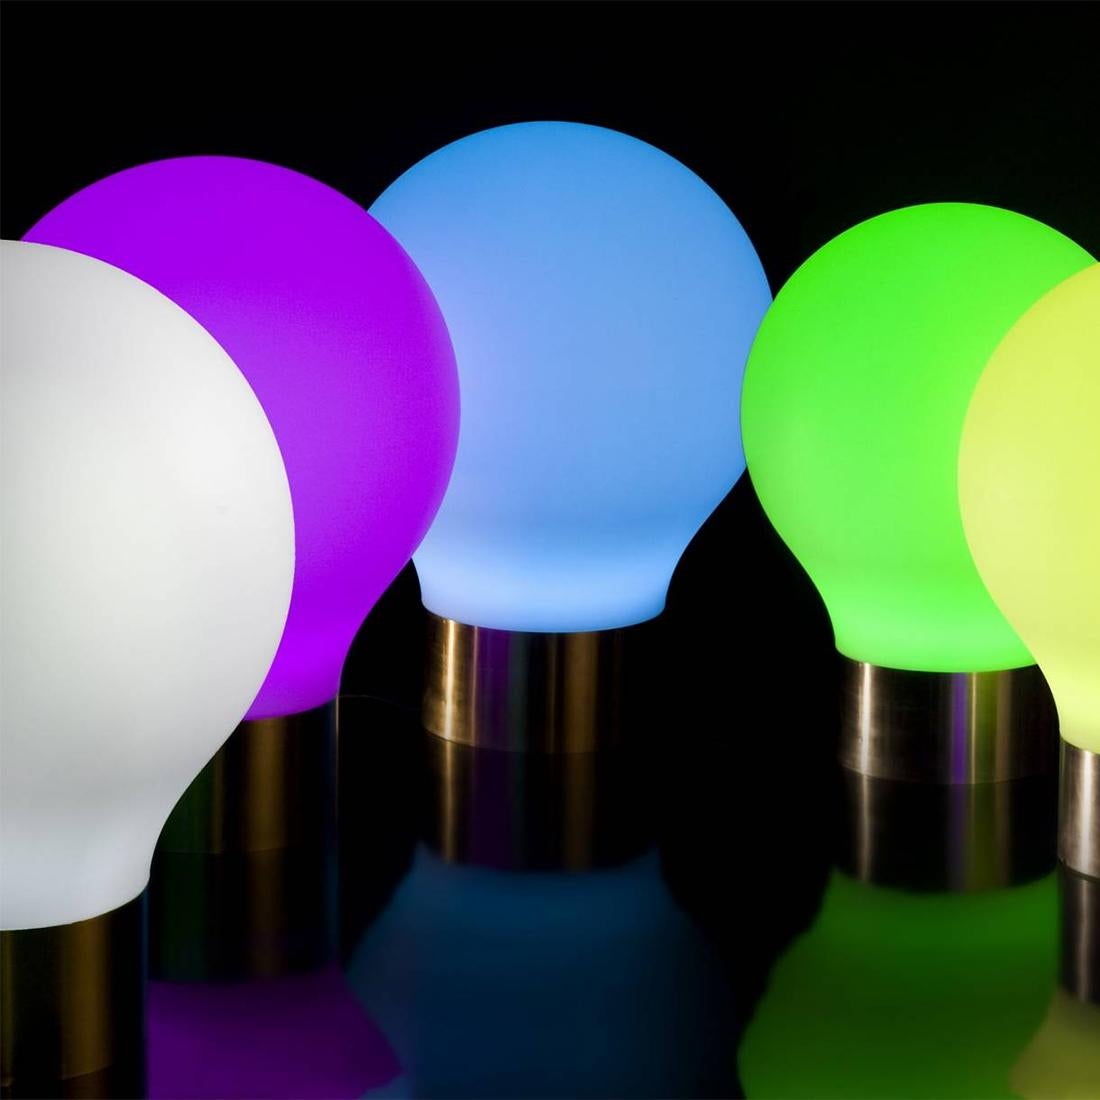 Floor lamp colored changed bulb in resin for
indoor or outdoor use. With red, or green, or
blue, or purple, or yellow Led light inside with
remote control unit for changing colors. 
(Remote control included).
Available in diameter 75cm x height